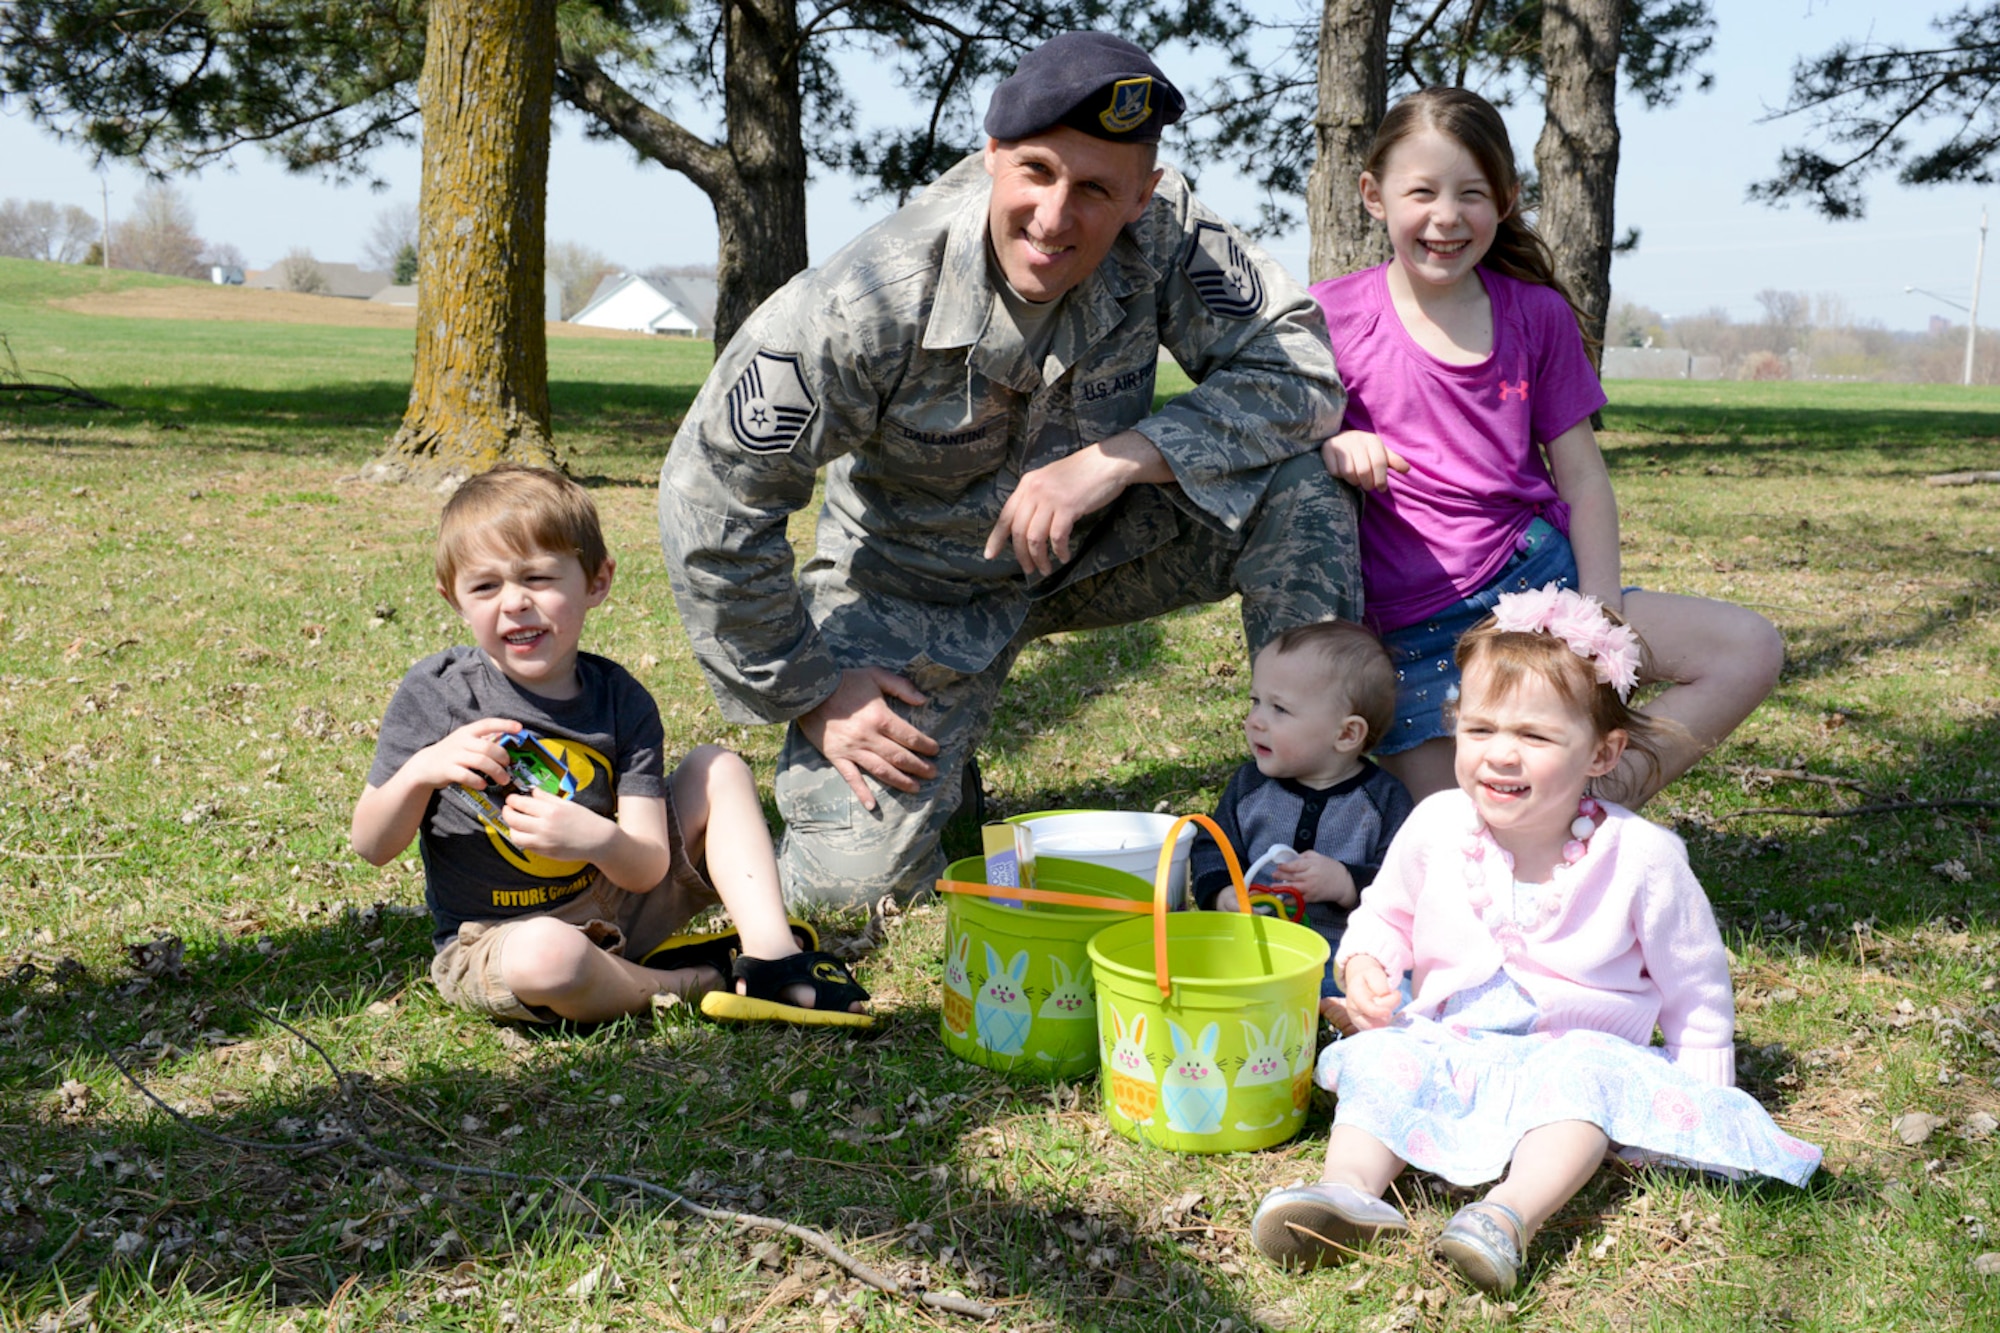 Master Sgt. Anthony Ballantini (middle, in uniform) poses for a photo with his children during the 2015 Annual Easter Egg Hunt held outside of the Dining Facility of the 132d Wing, Des Moines, Iowa on Saturday, April 11, 2015.  (U.S. Air National Guard photo by Staff Sgt. Linda K. Burger/Released)